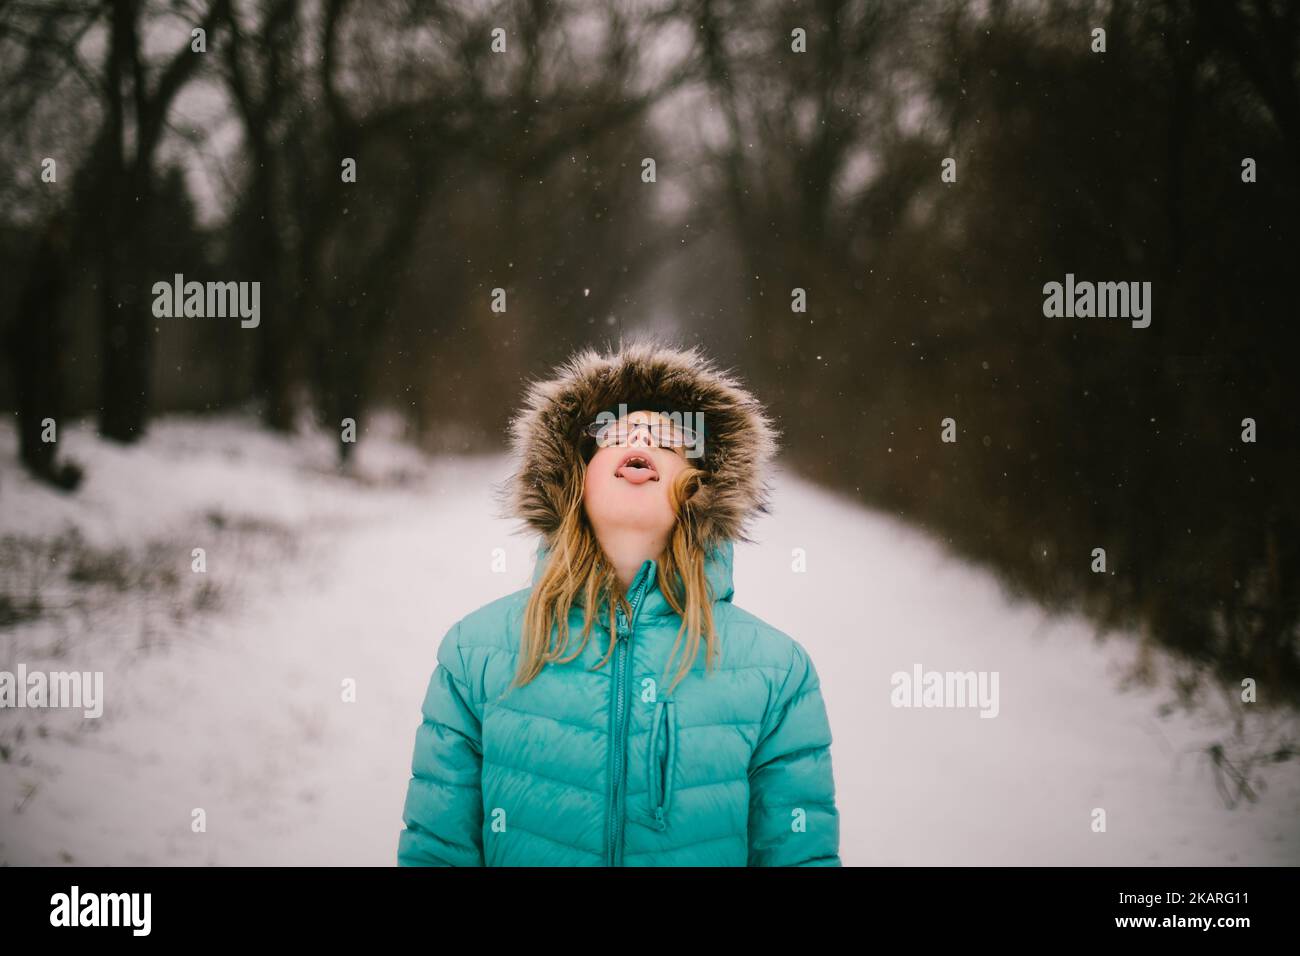 Blond girl catches snowflakes on tongue in forest snow fall Stock Photo